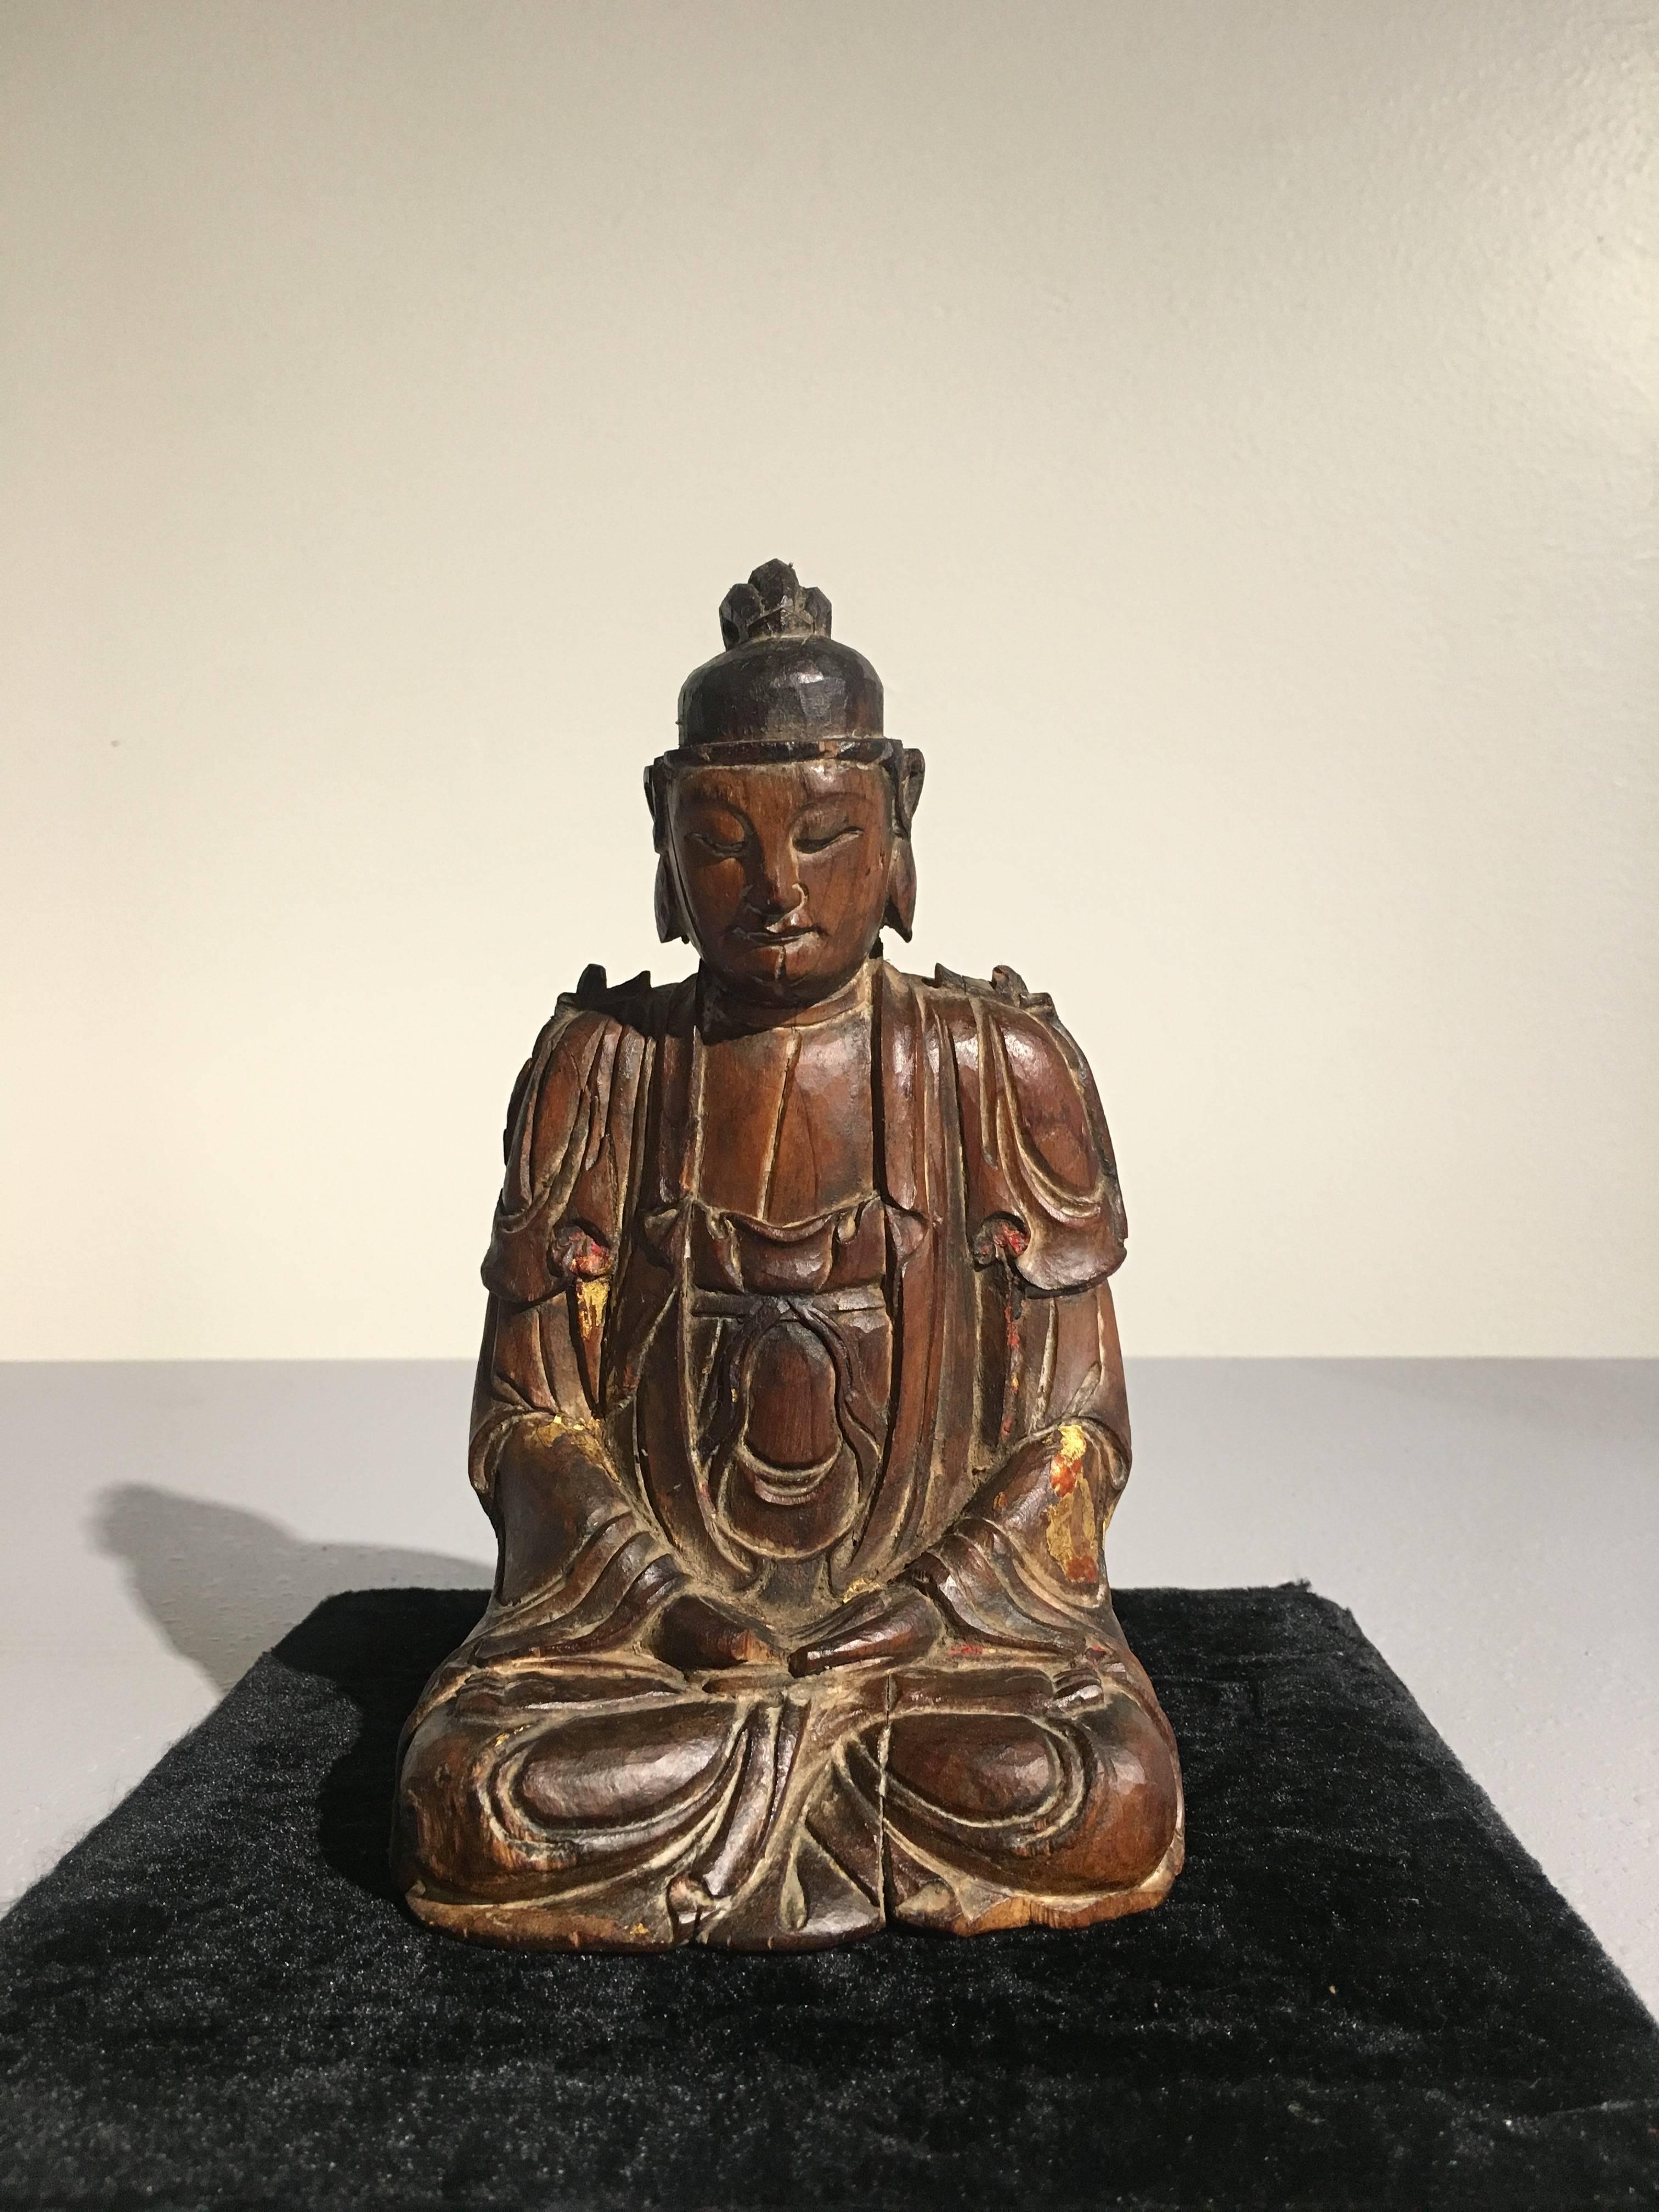 A small and very fine Chinese carved sandalwood figure of a bodhisattva, possibly Avalokiteshvara (Guan Yin), Song Dynasty (960 to 1276), circa 13th century, China.

Carved from a single piece of fragrant sandalwood, the enlightened being is